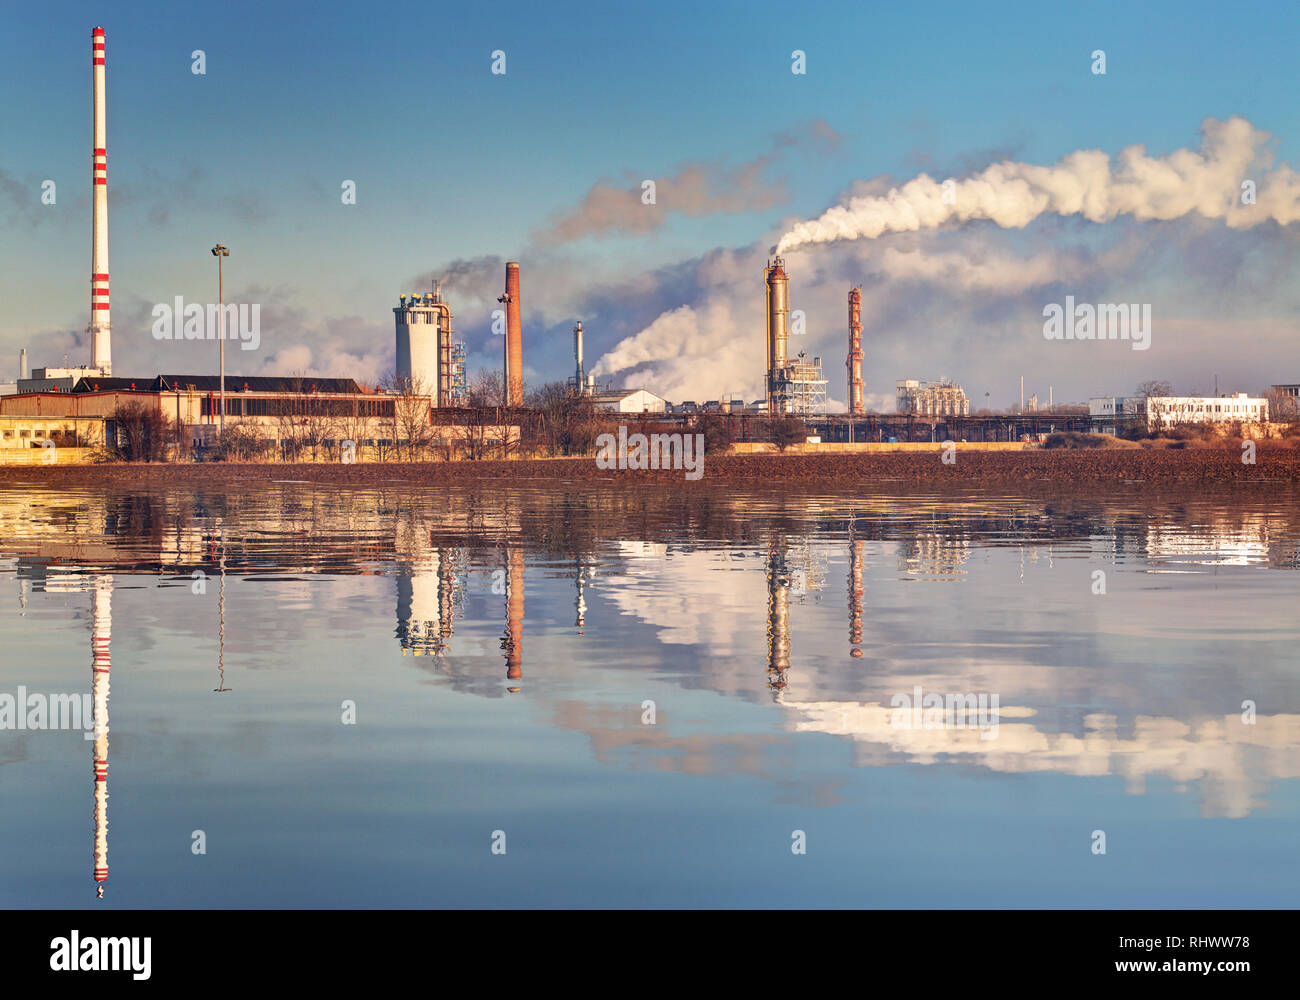 Air pollution coming from factory smoke stacks Stock Photo